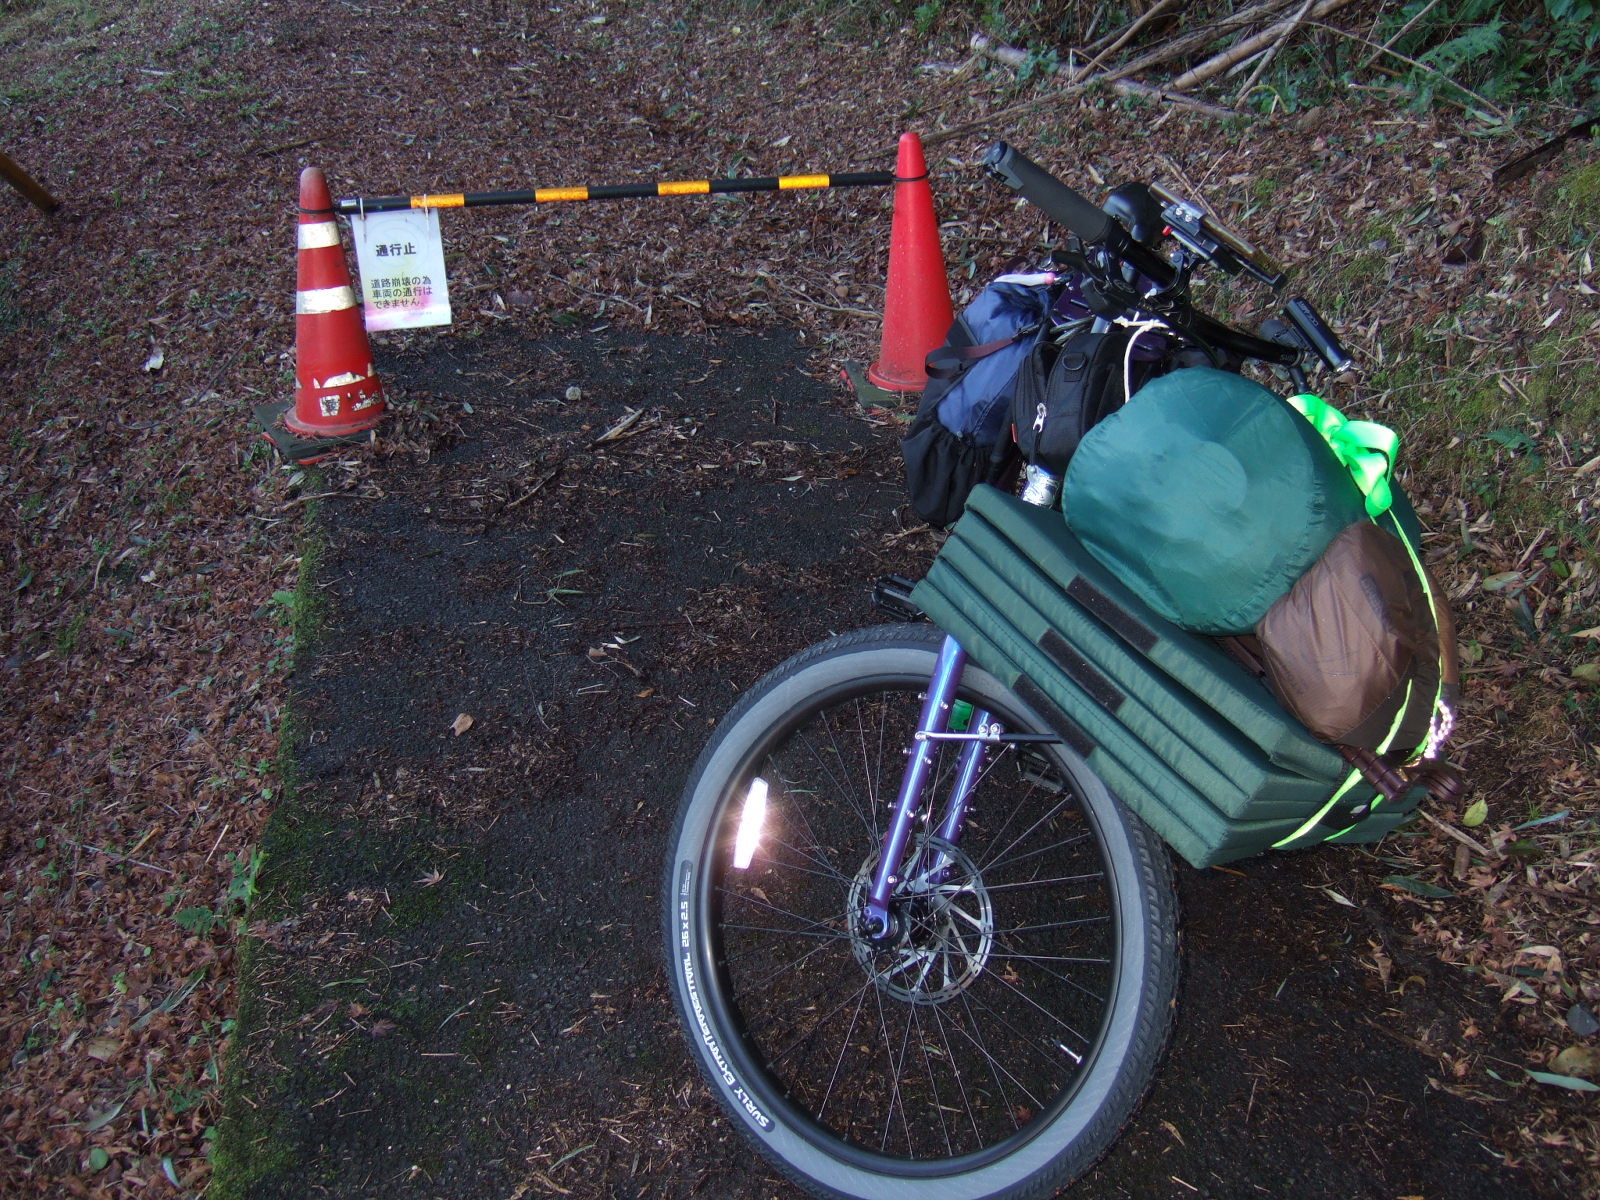 A loaded cargo bike parked on a forest floor, with traffic cones behind supporting a plastic rail on which is hung a sign reading: “No Through Road/Due to destruction of the road, vehicles cannot pass” (通行止・道路崩壊の為車両の通行はできません).